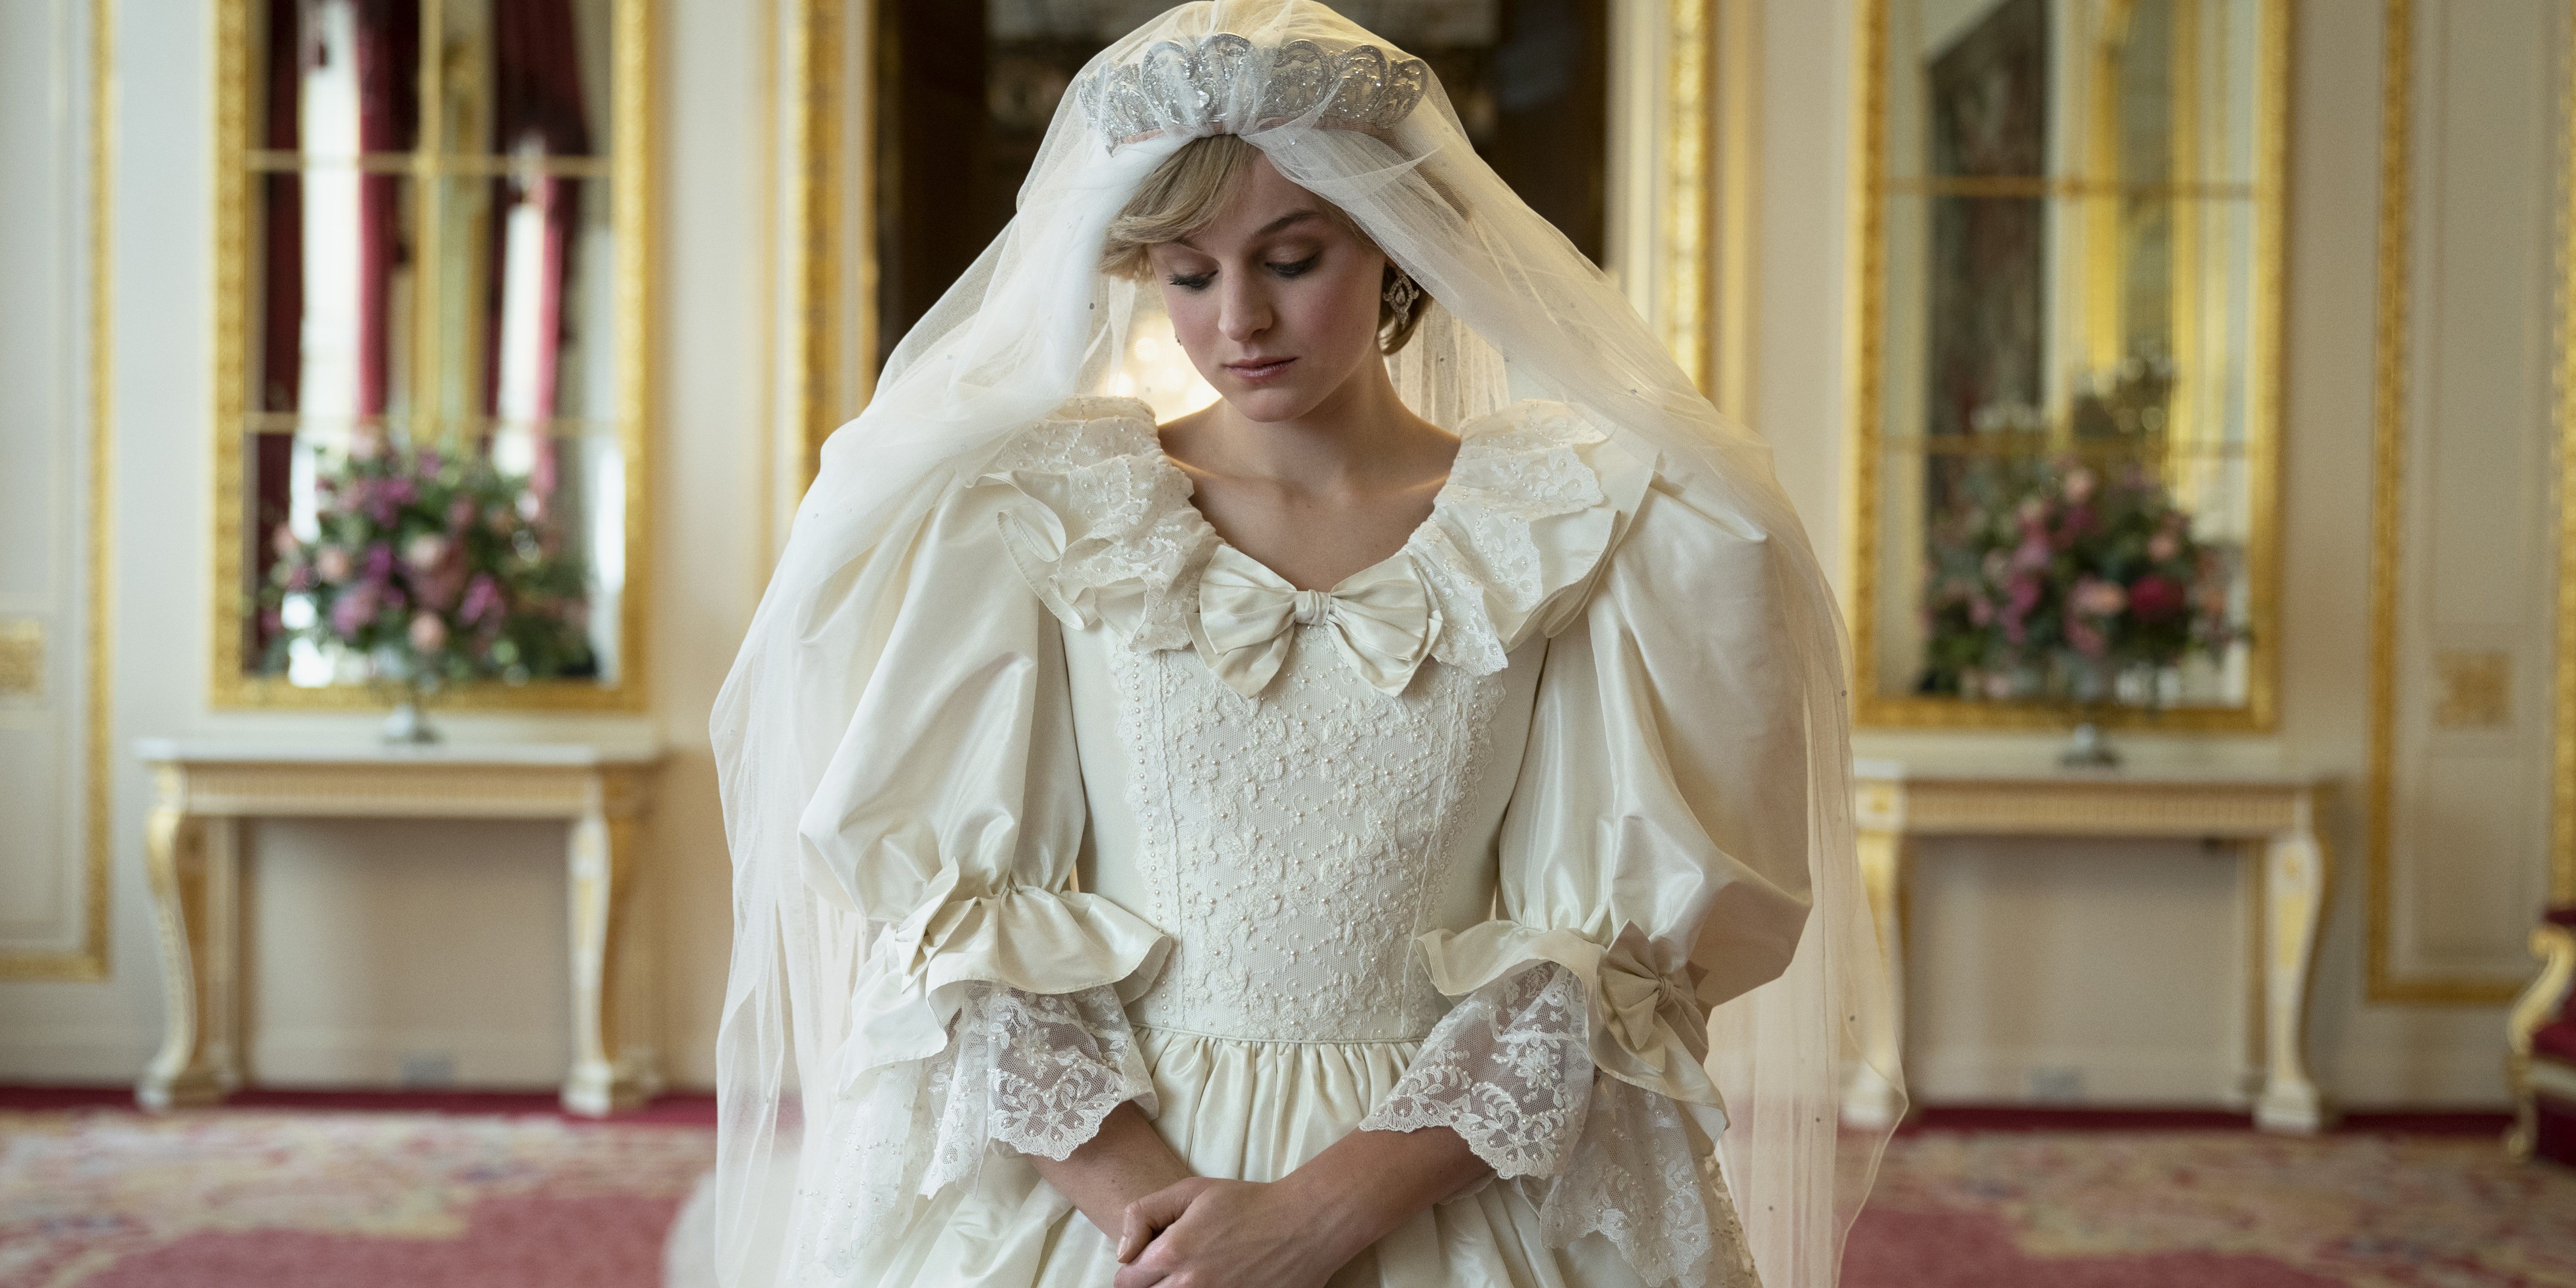 Diana in her wedding dress in The Crown.